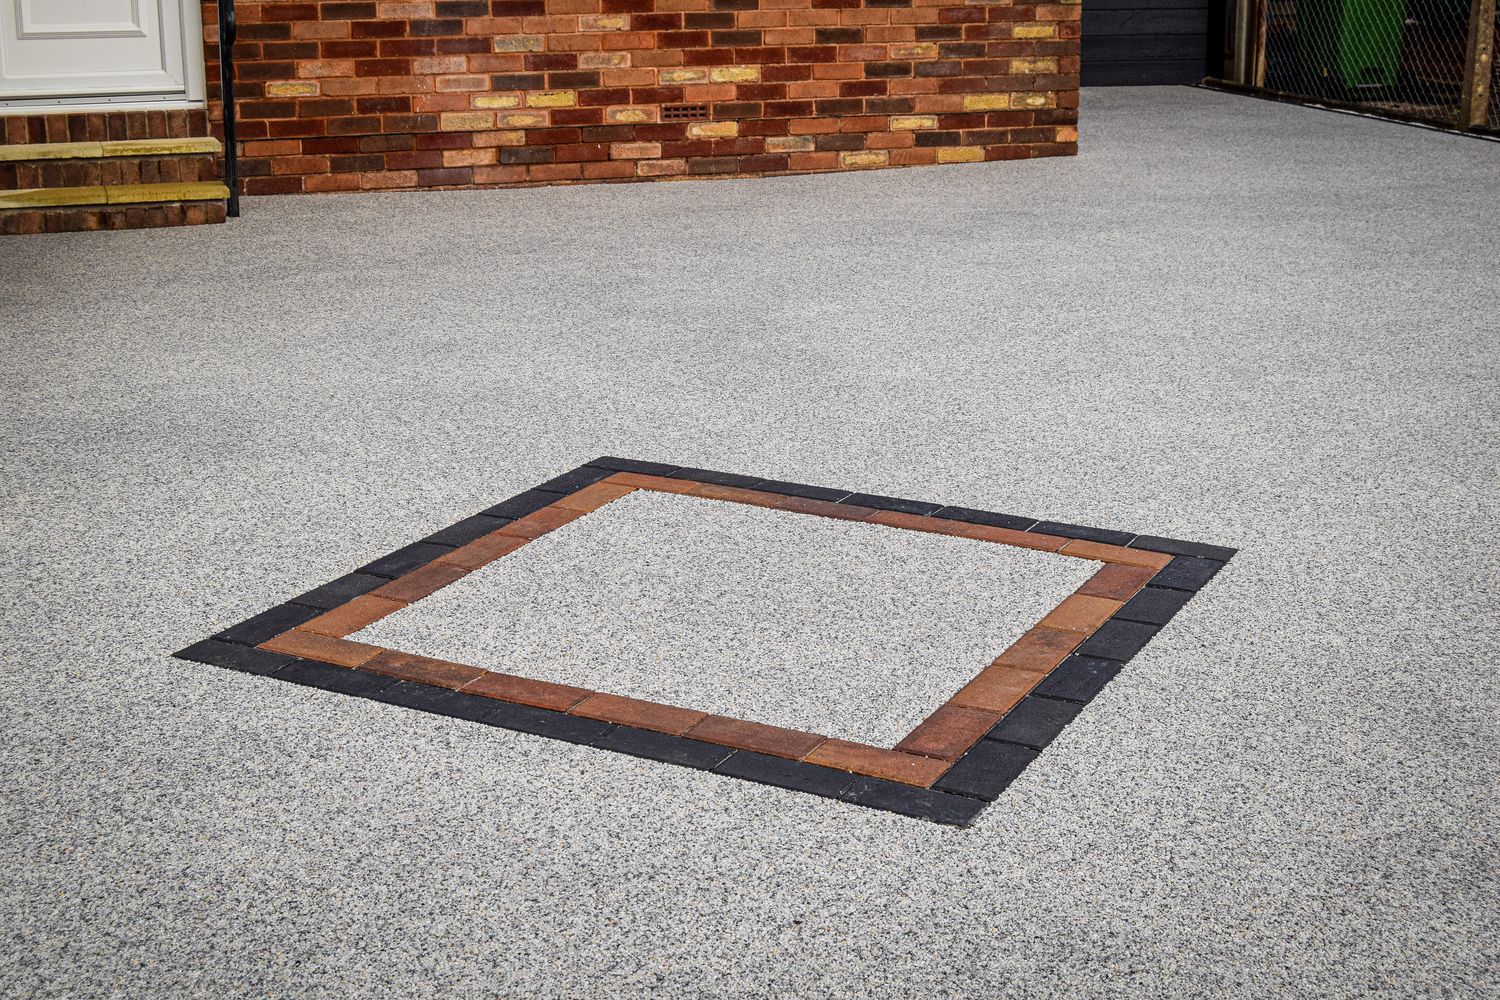 A grey resin driveway with a diamond shape in the middle.